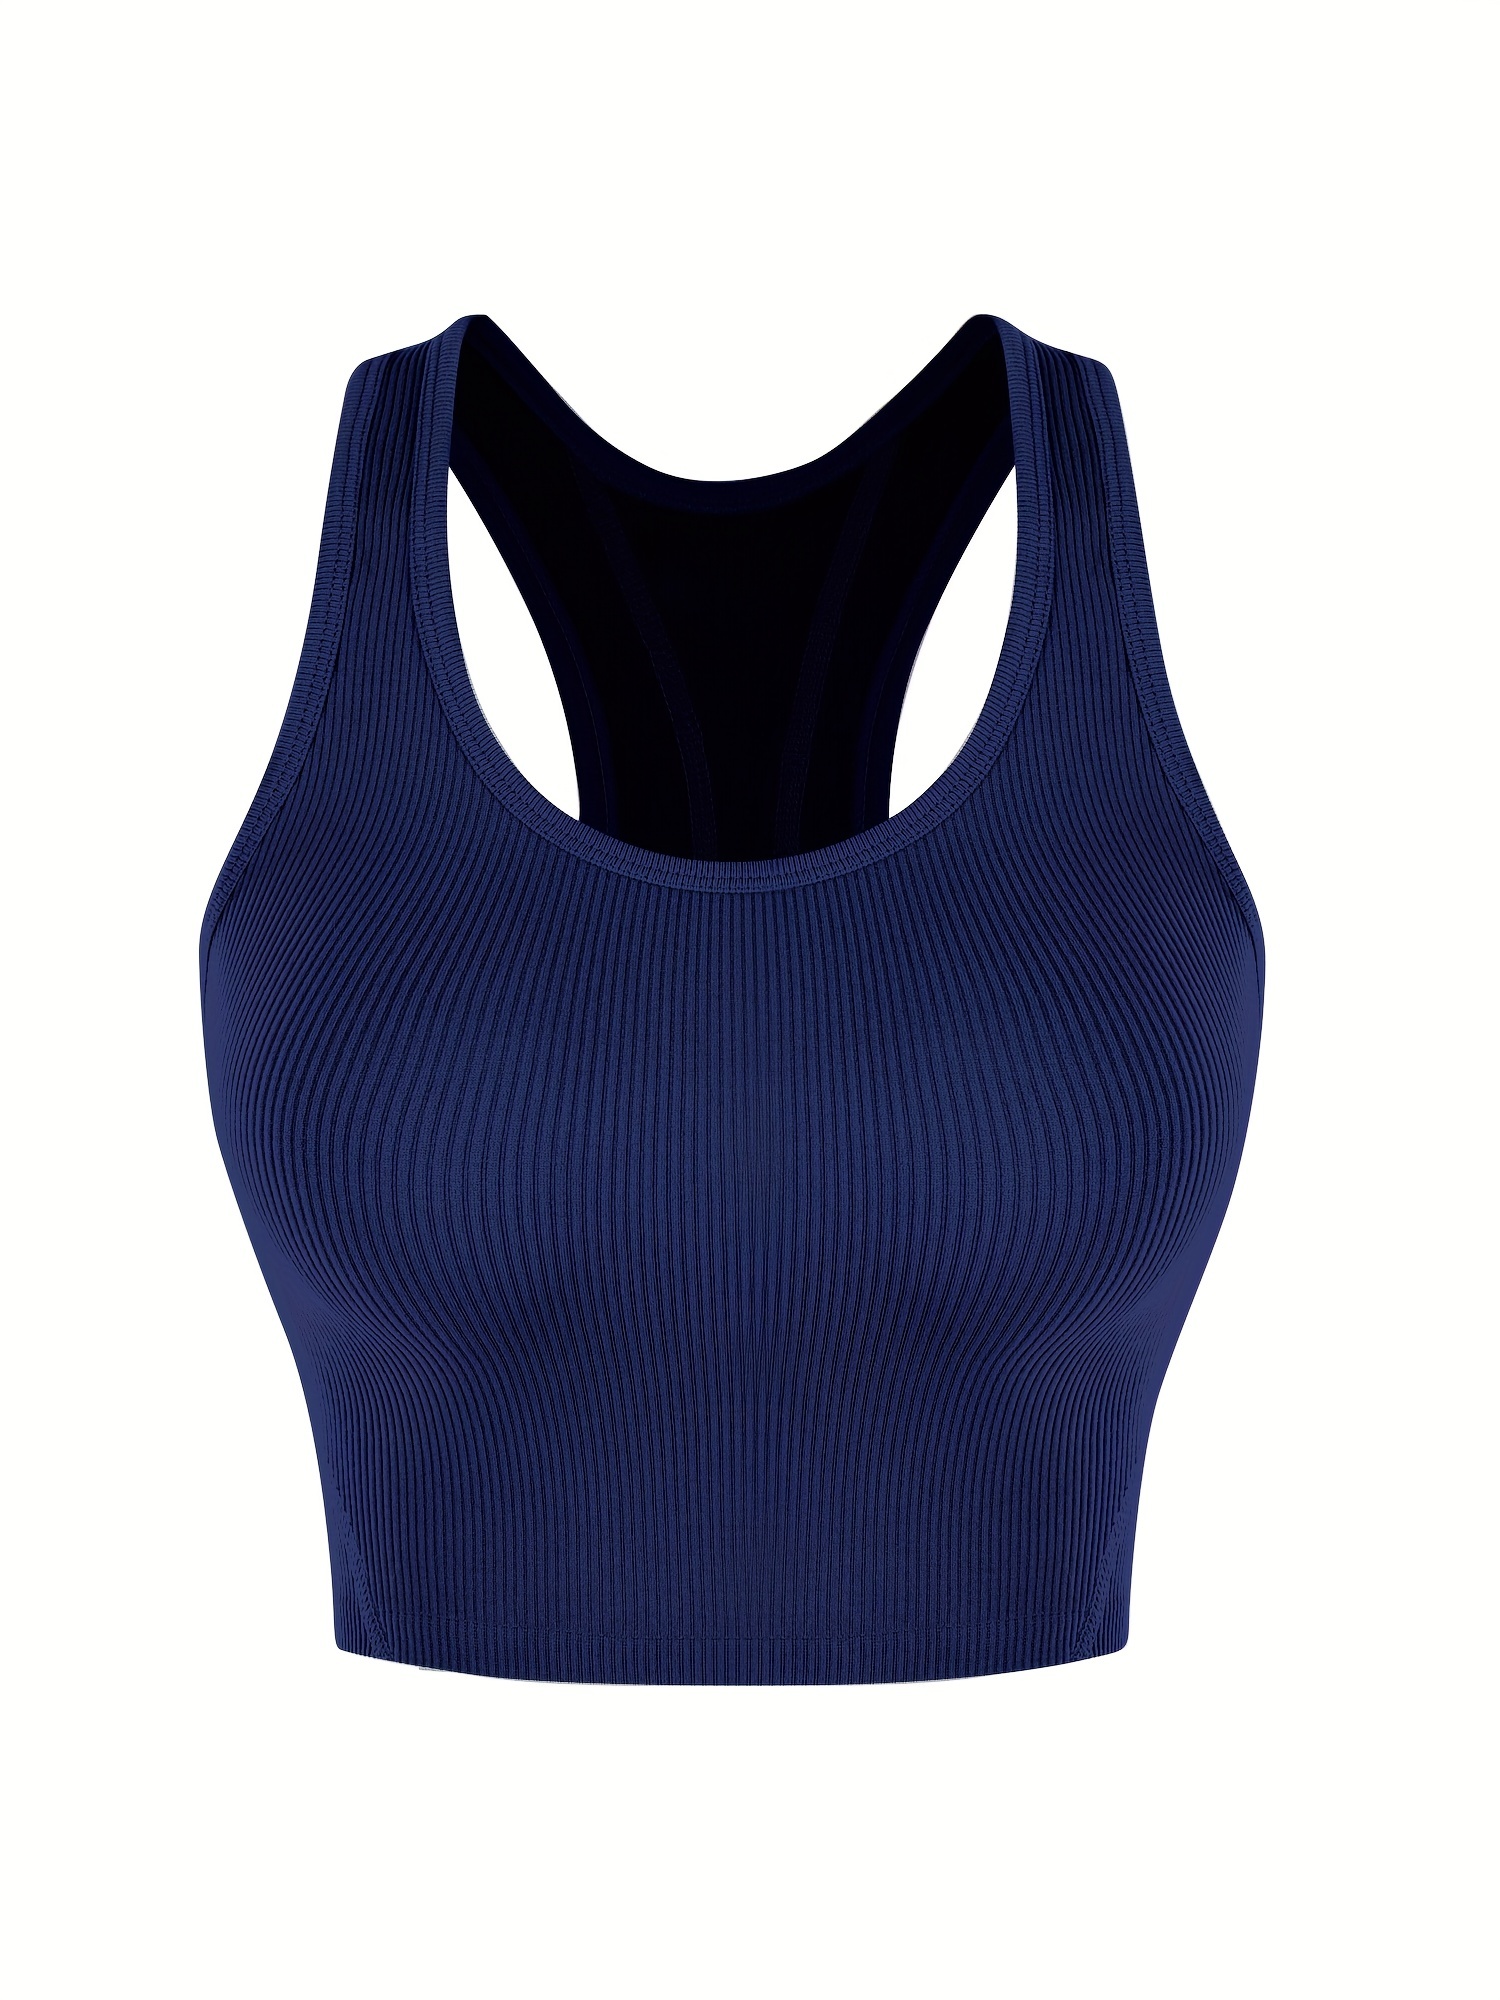 Women Workout Crop Top Built in Bra Ribbed Athletic Tank Tops Casual  Sleeveless Collar Shirts Padded Sports Yoga Vest